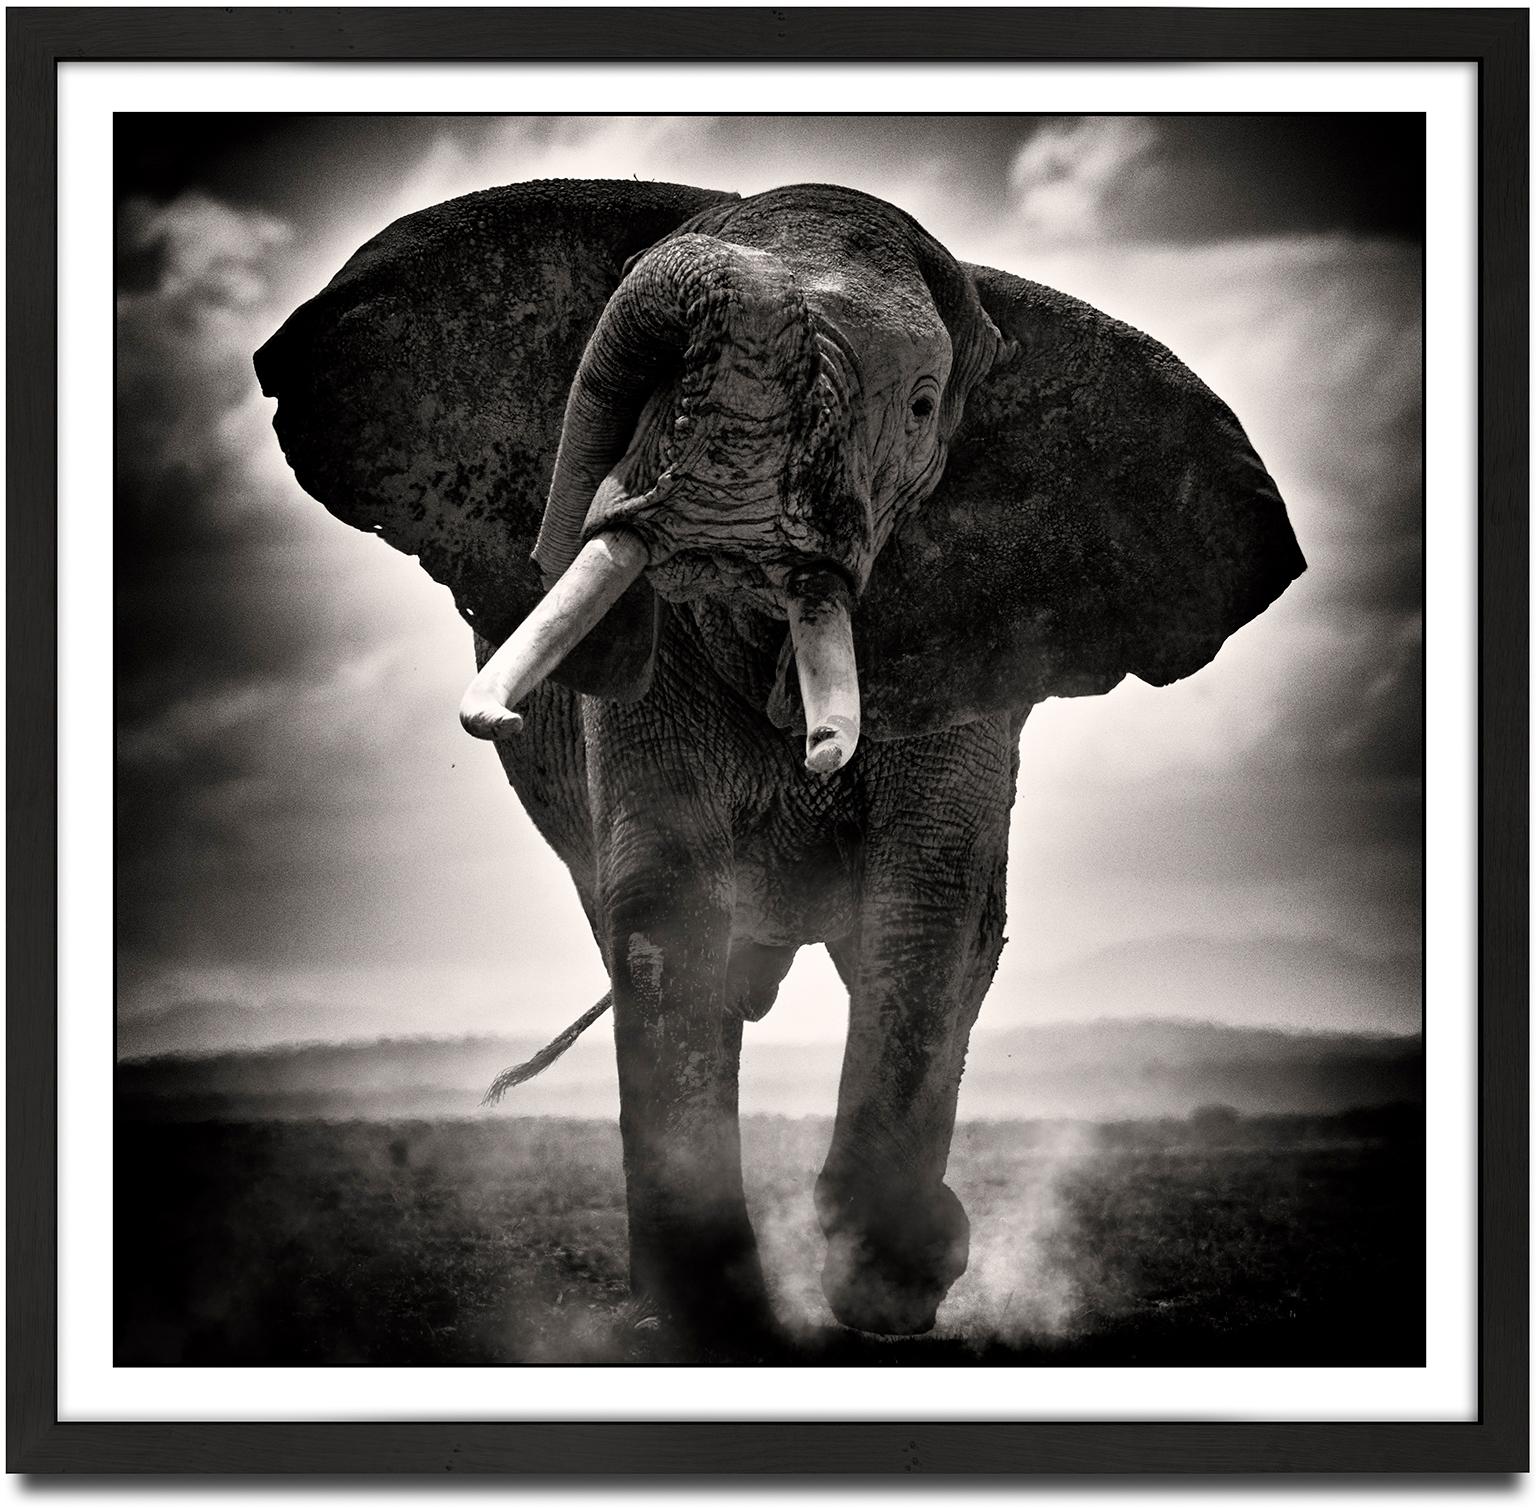 POWER II, animal, wildlife, black and white photography, elephant, africa - Photograph by Joachim Schmeisser